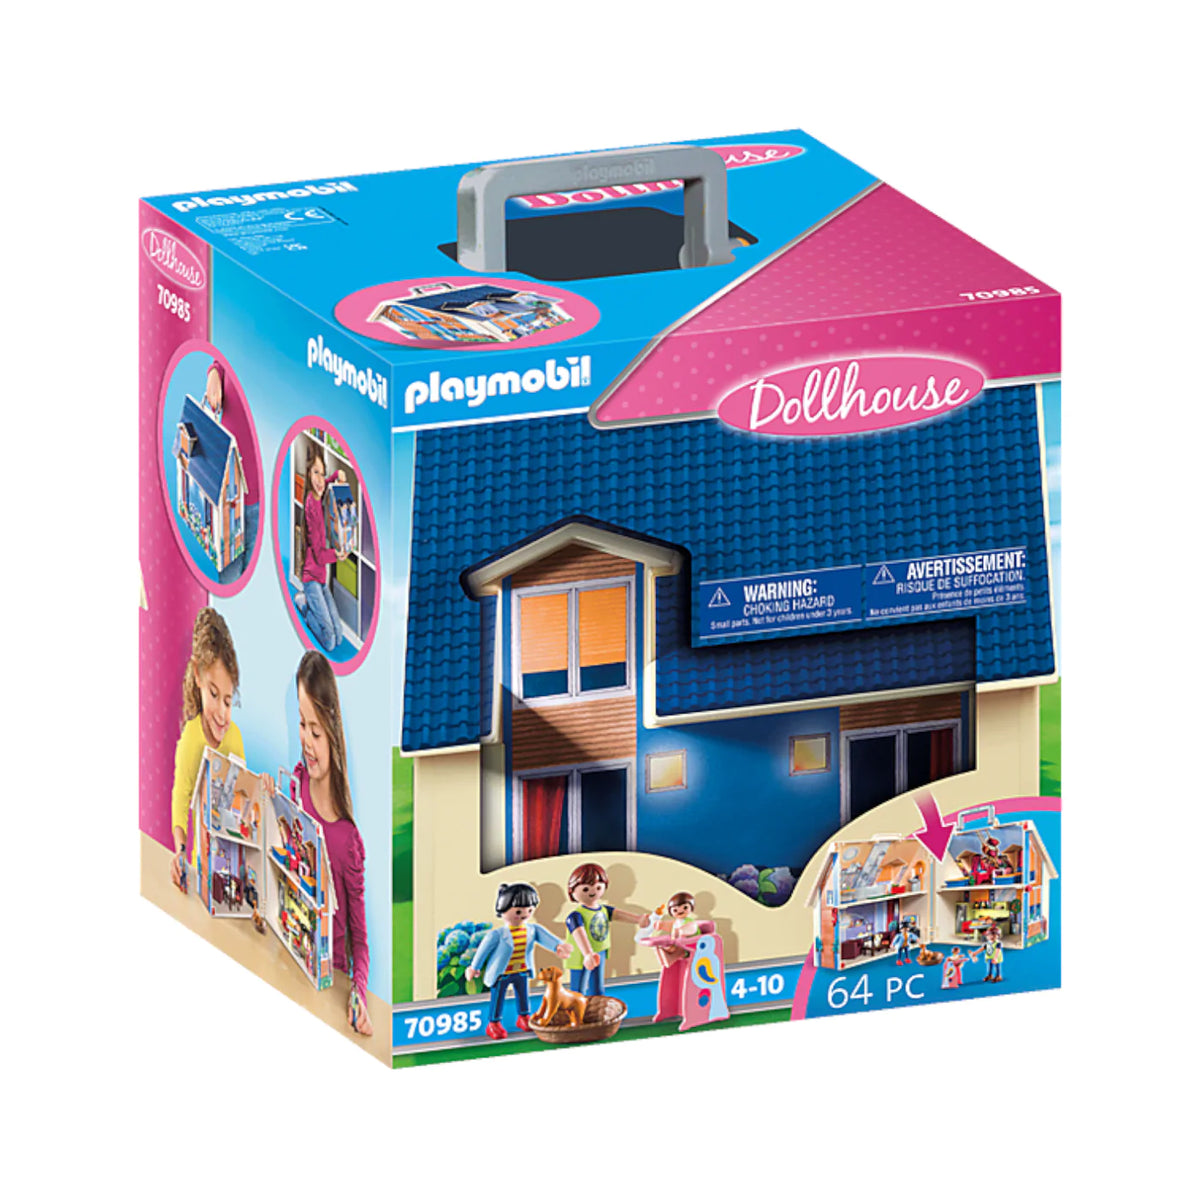 Playmobil Add-On Floor Extension For Large Doll House Building Set